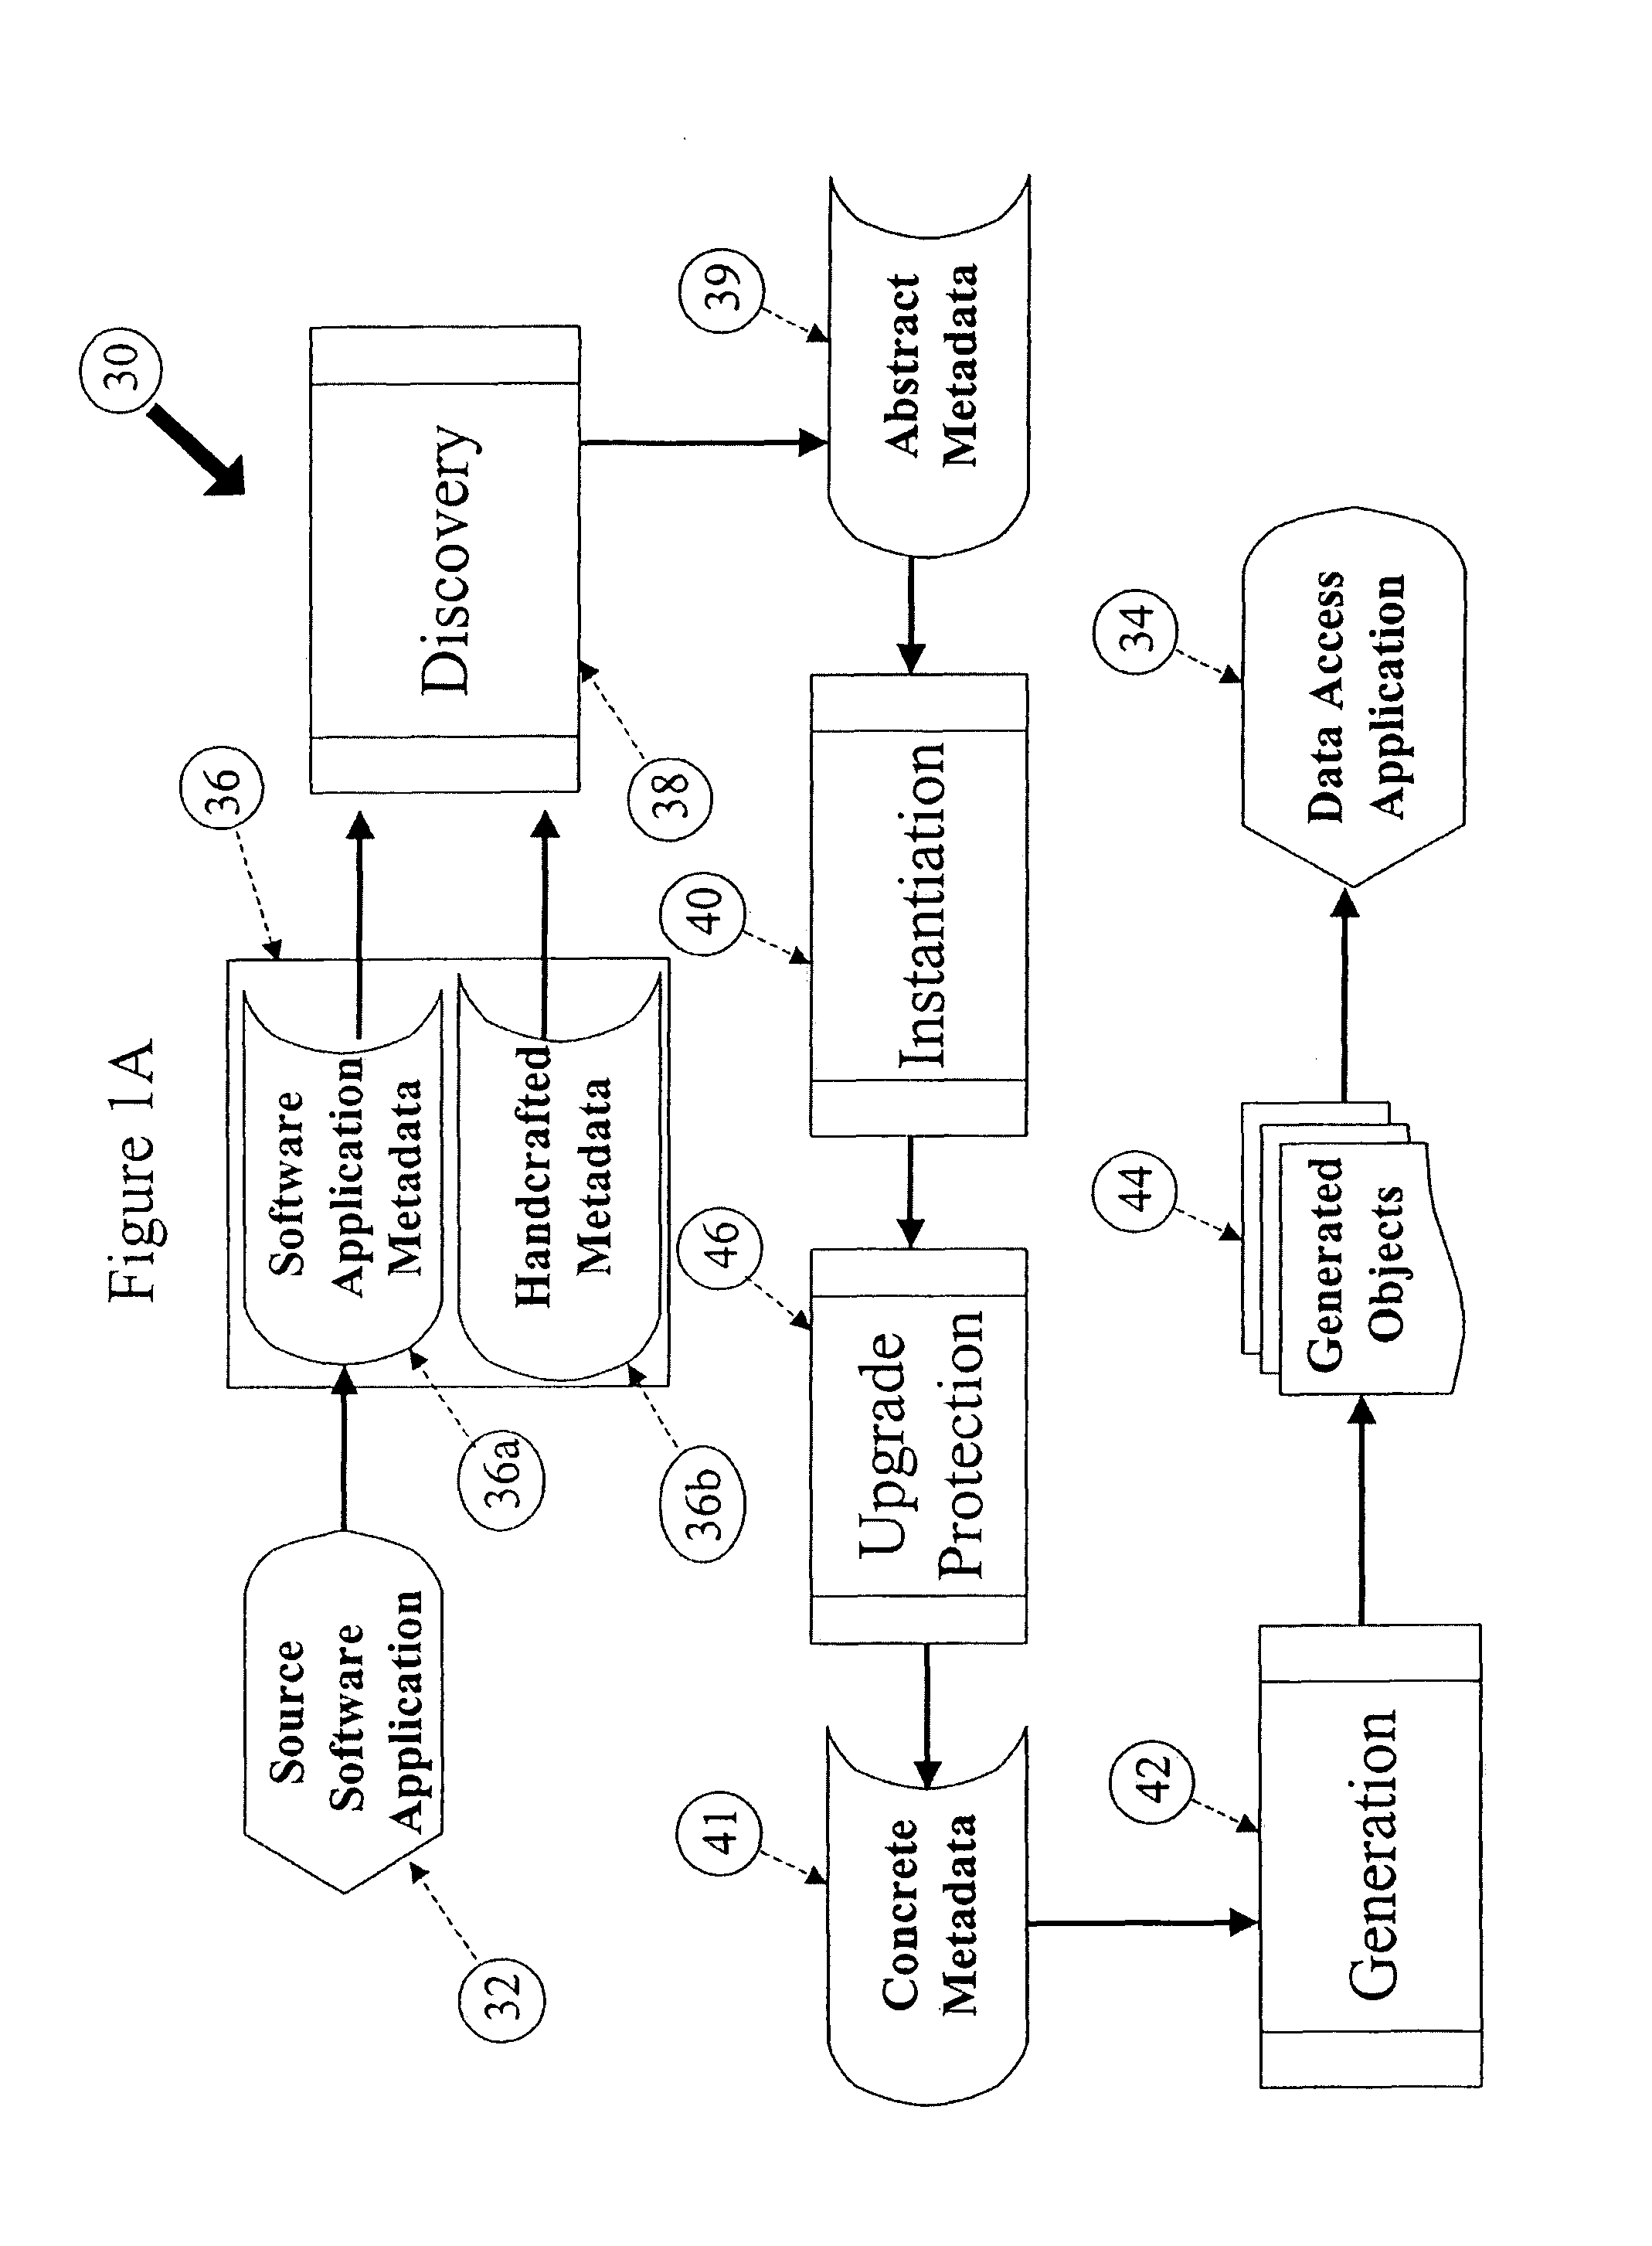 Computer implemented system and method for the generation of data access applications